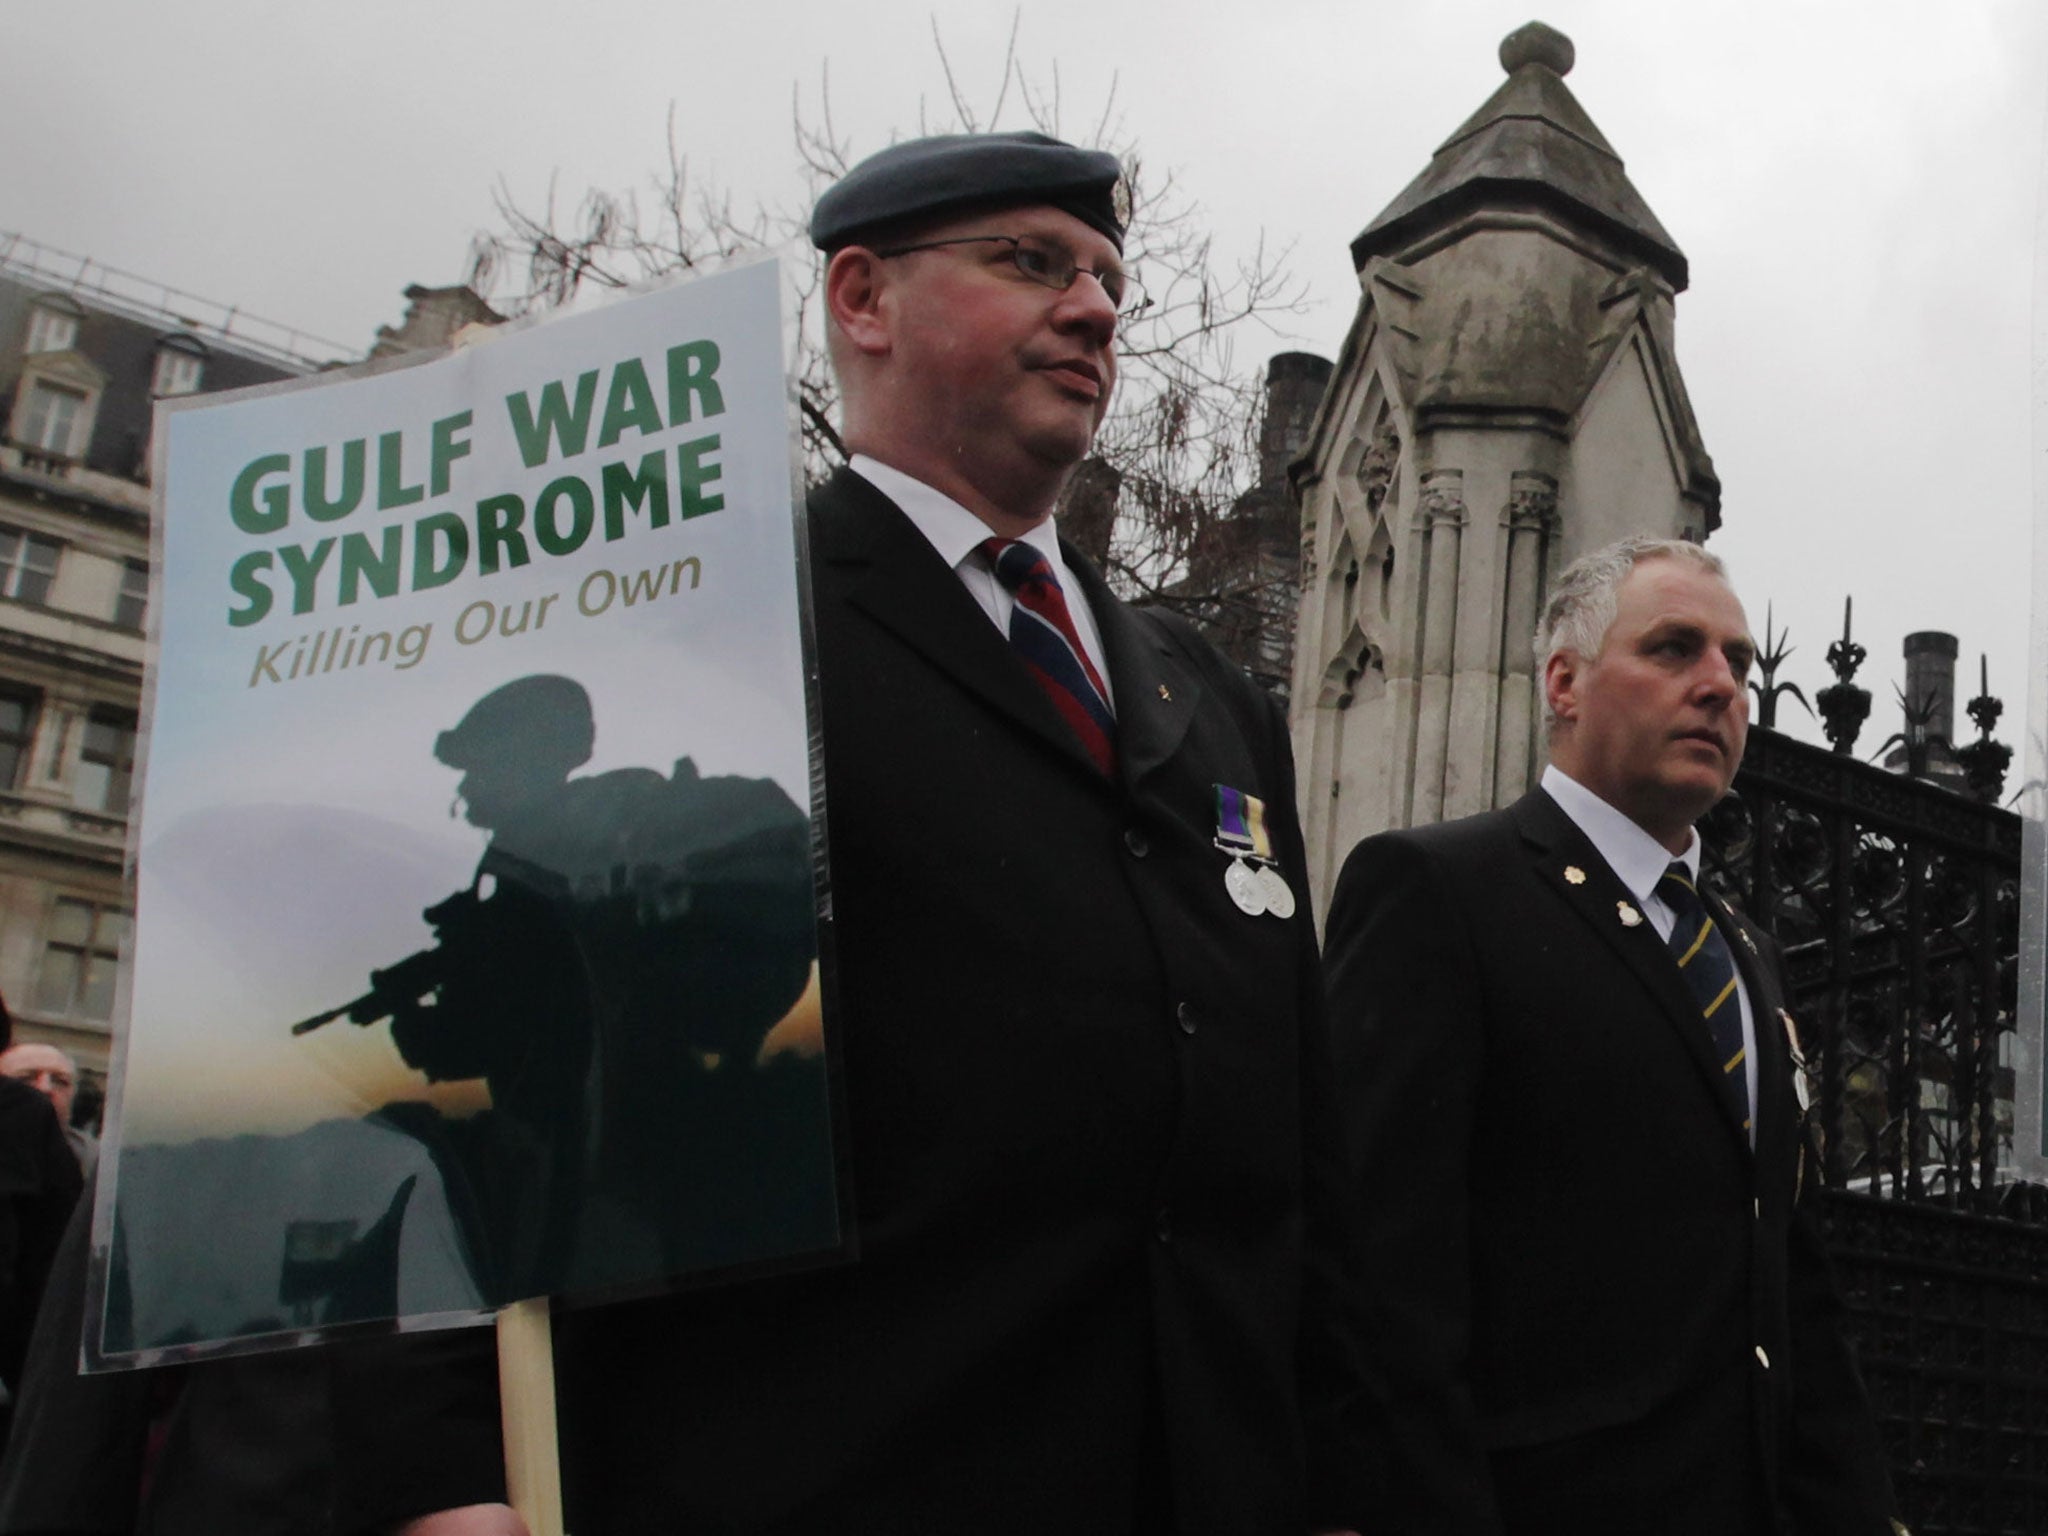 There could be as many as 33,000 Gulf War Syndrome sufferers in the UK